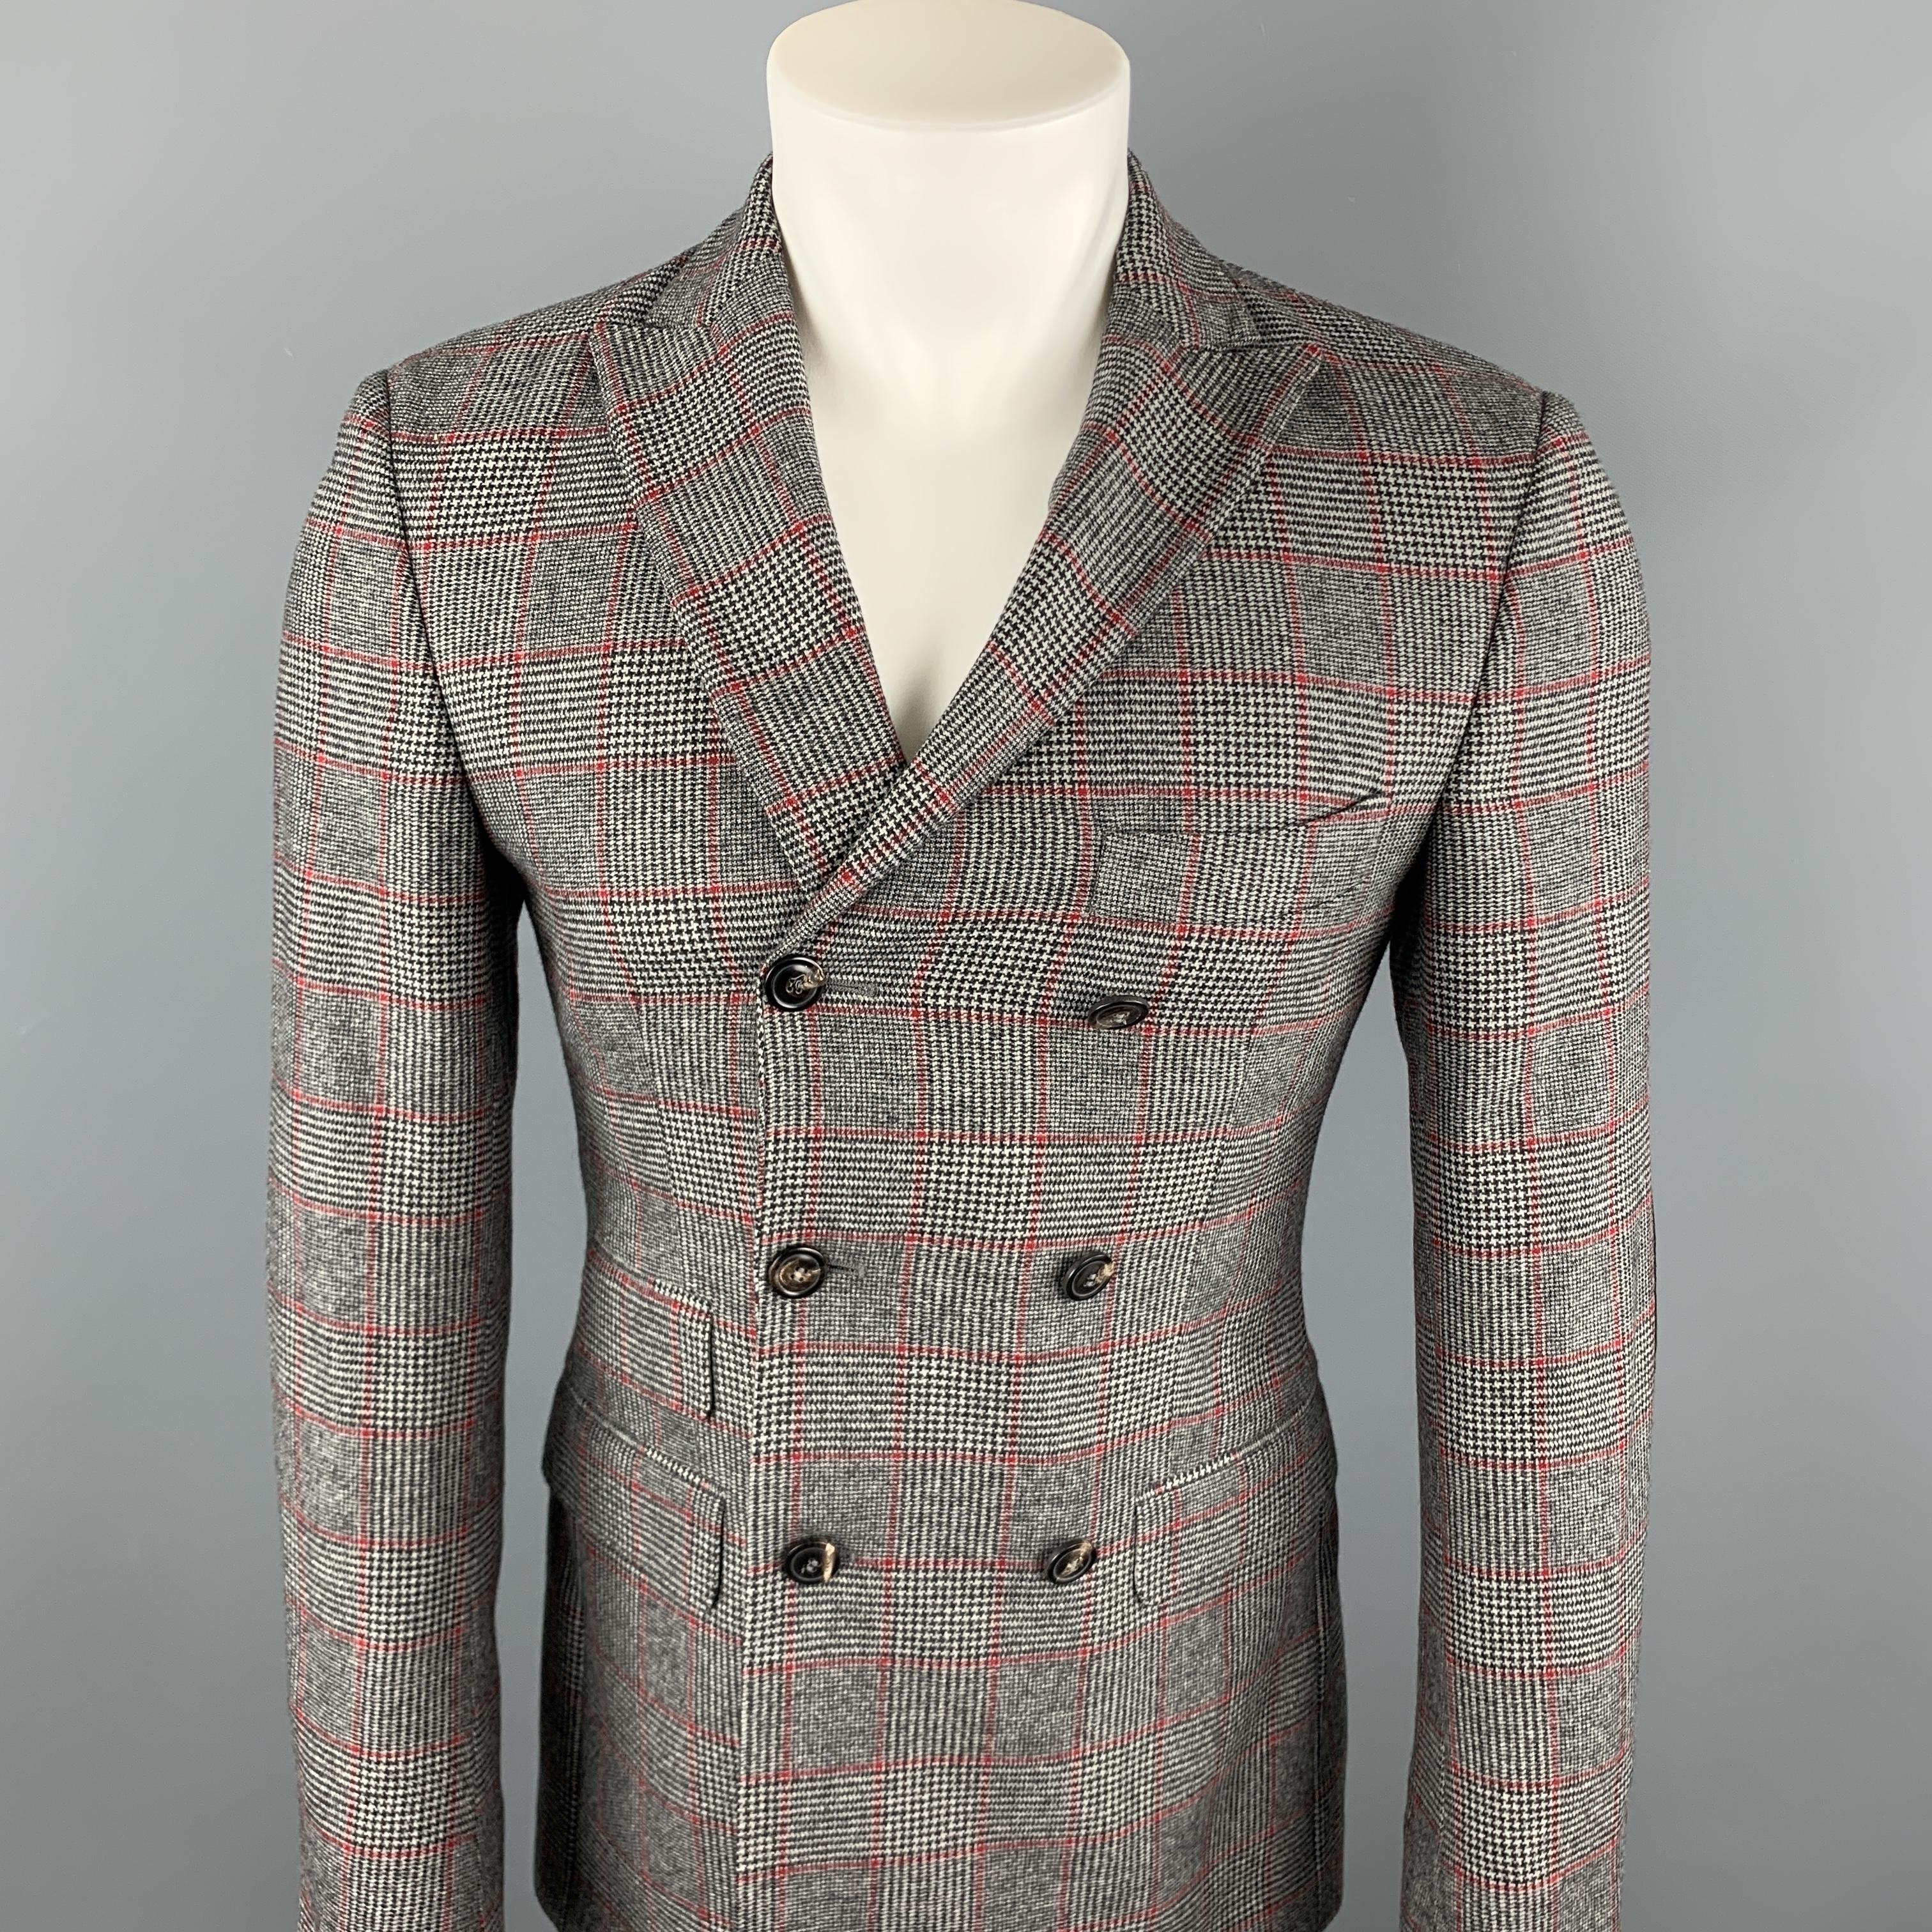 MICHAEL BASTIAN sport coat comes in a black & white plaid wool featuring a peak lapel style, suede elbow patches, flap pockets, and a double breasted closure. Made in Italy.

Excellent Pre-Owned Condition.
Marked: 46

Measurements:

Shoulder: 18 in.